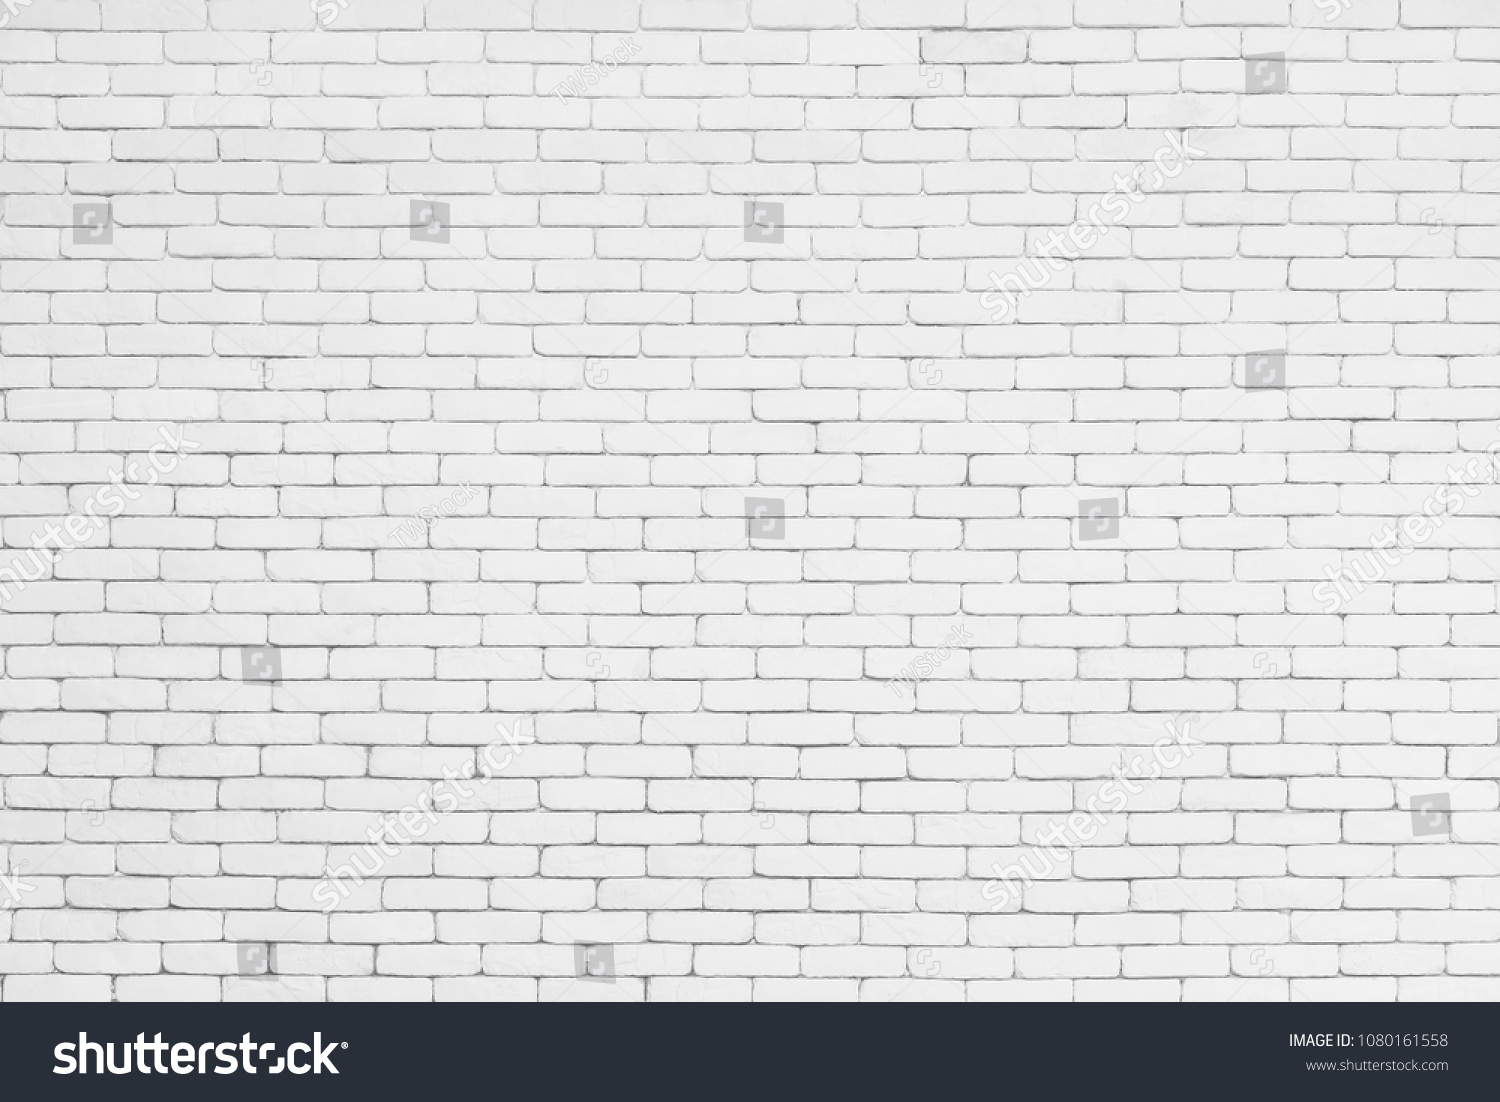 Abstract background from white bricks pattern on wall. Architecture and construction background. #1080161558